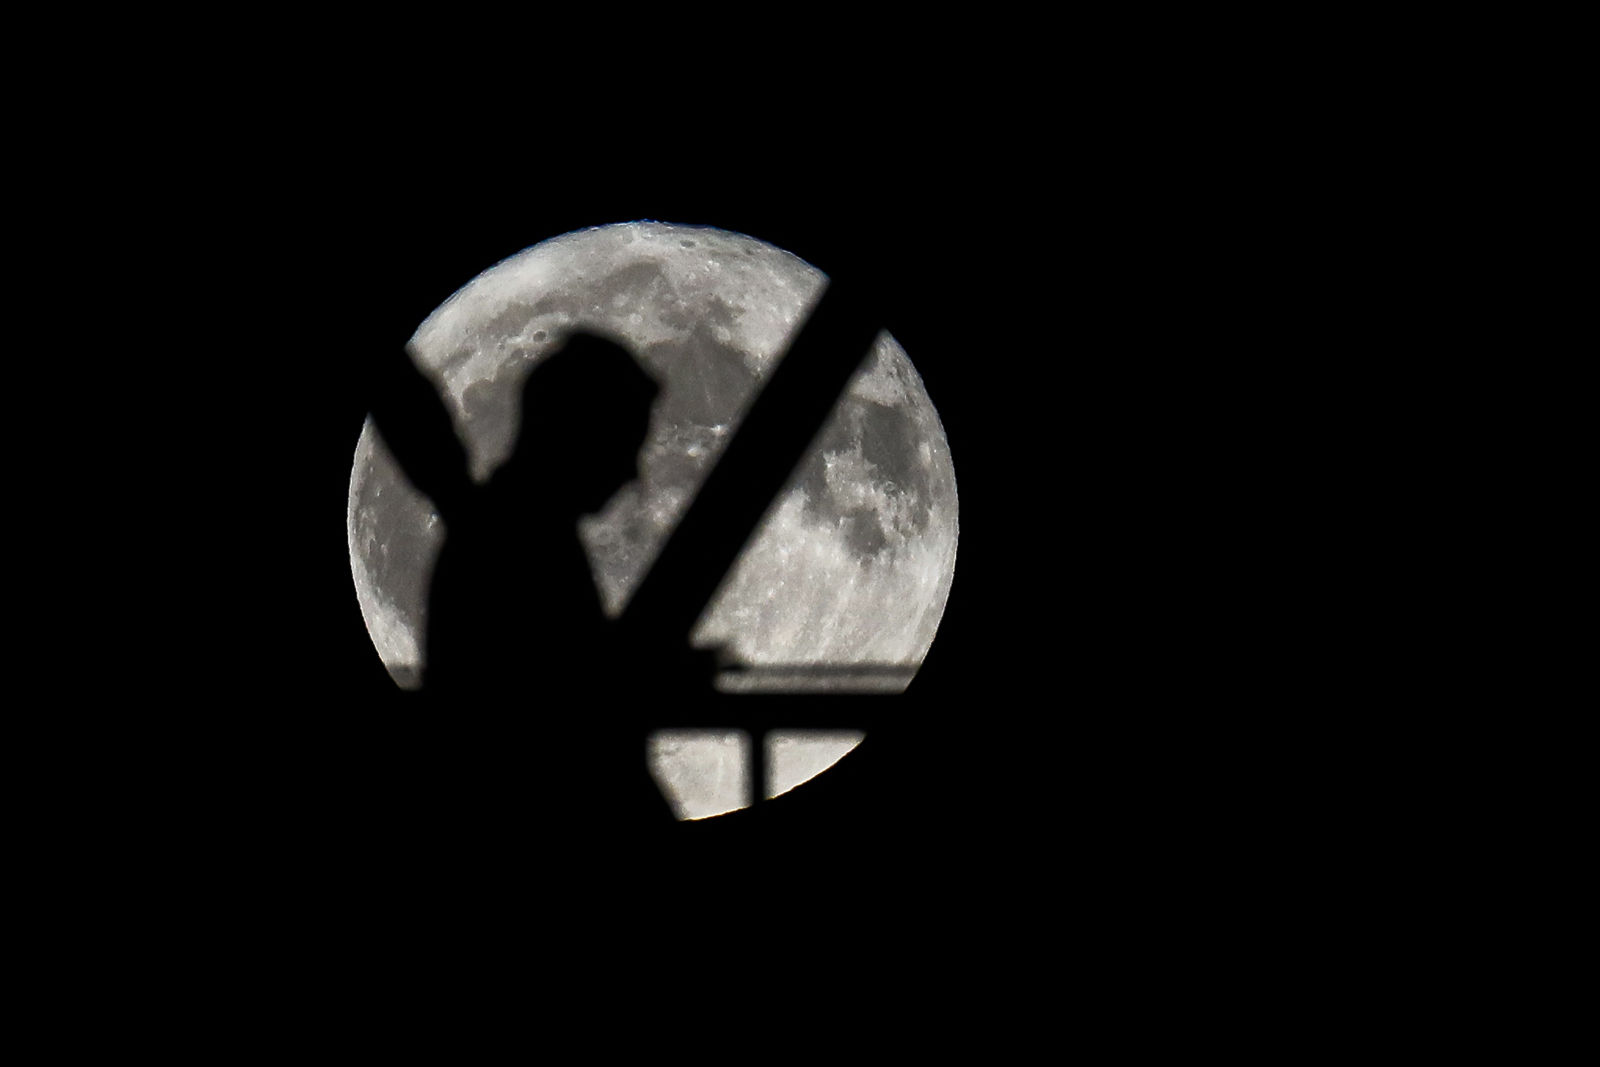 A pedestrian crosses over the John A. Roebling Suspension Bridge as the full moon rises, Thursday, Oct. 5, 2017, in Cincinnati. The moon, better known as the Harvest Moon because it's the first full moon during the fall season, had not risen in its full stage during the month of October since 2009. (AP Photo/John Minchillo)